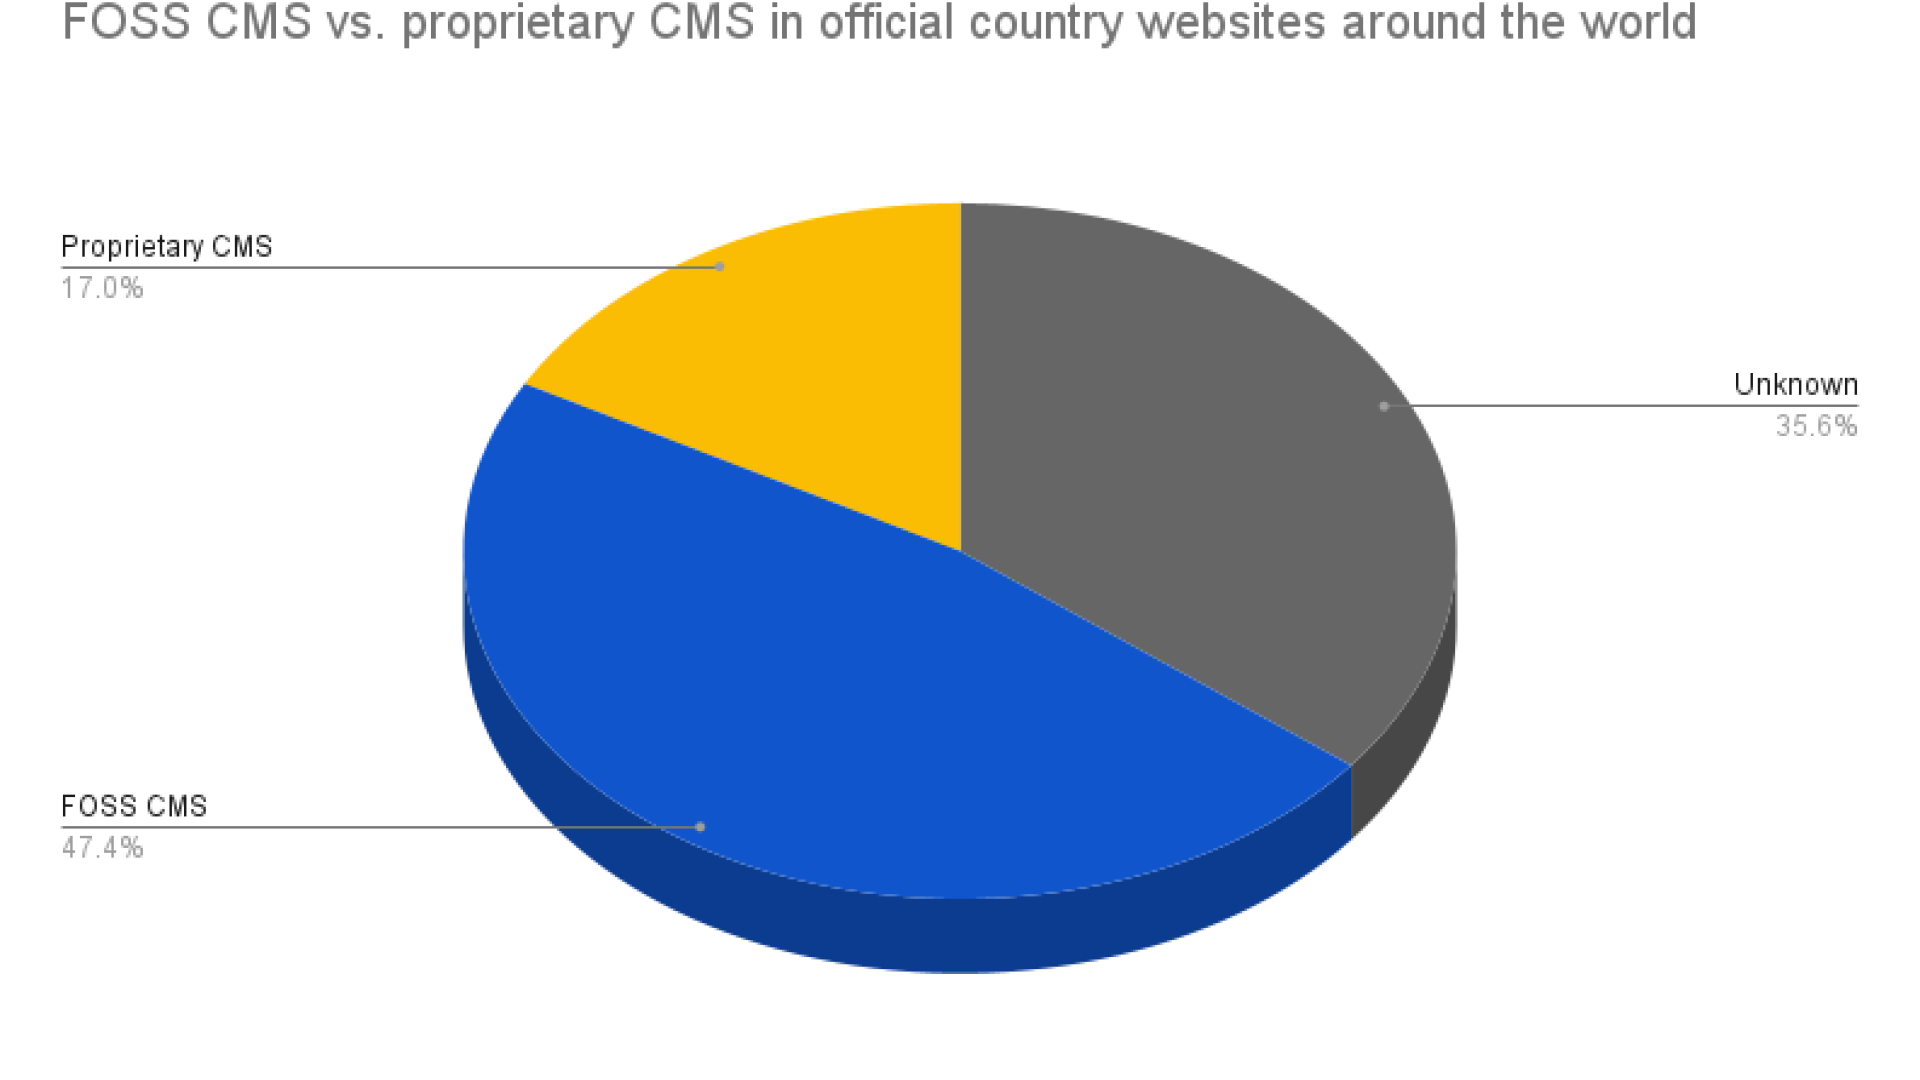 Free and Open-Source CMS usage vs. proprietary CMS usage in official national websites